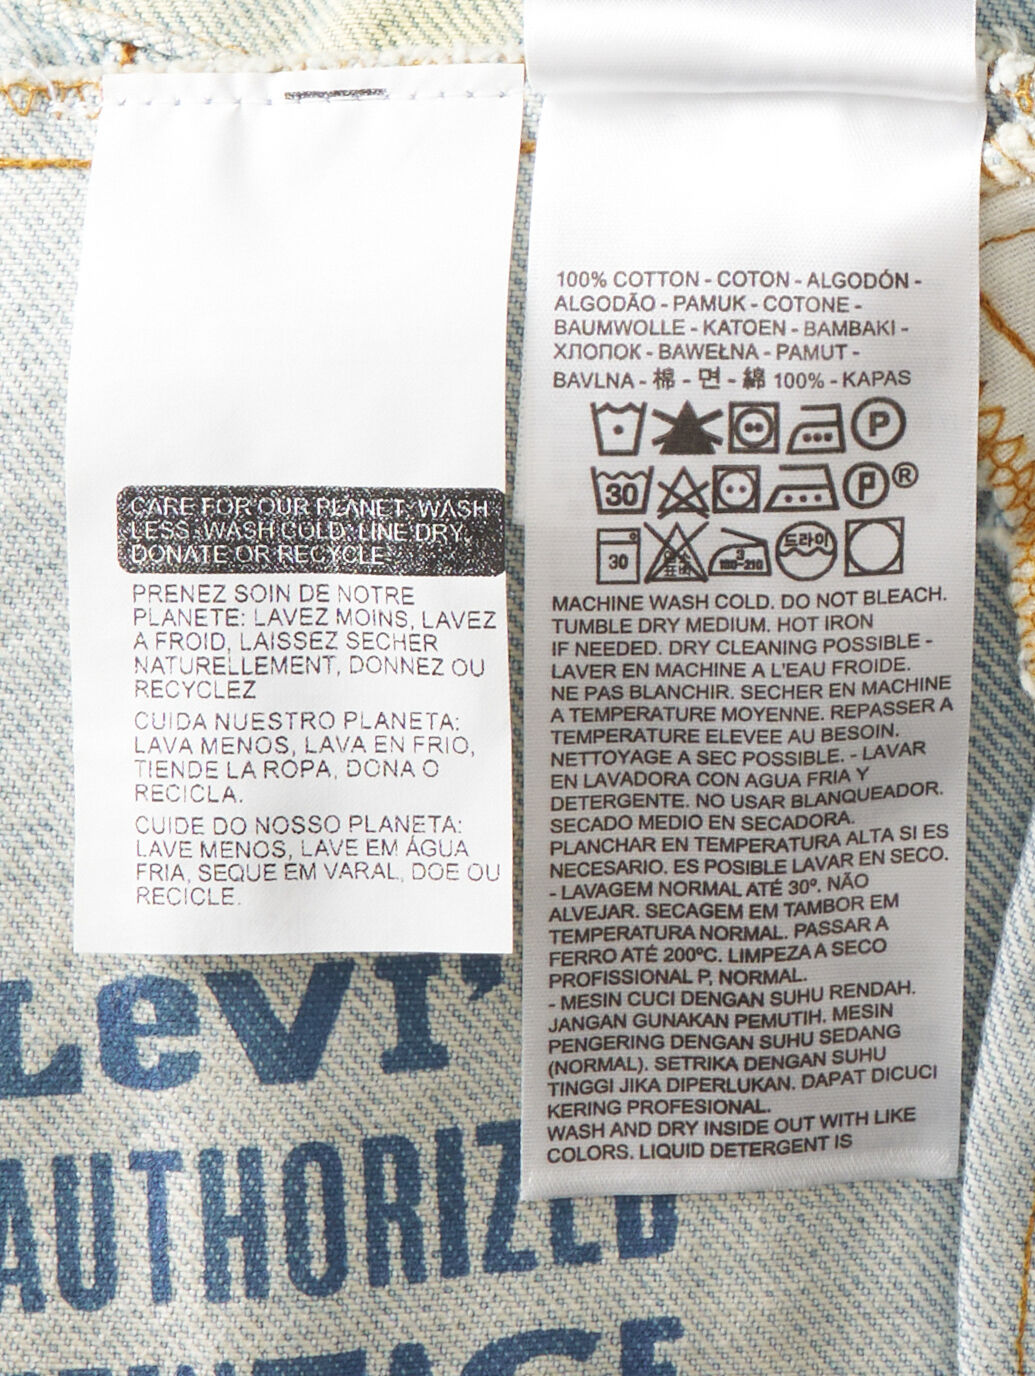 LEVI'S® AUTHORIZED VINTAGE MADE IN THE USA TYPEⅢ トラッカー ...